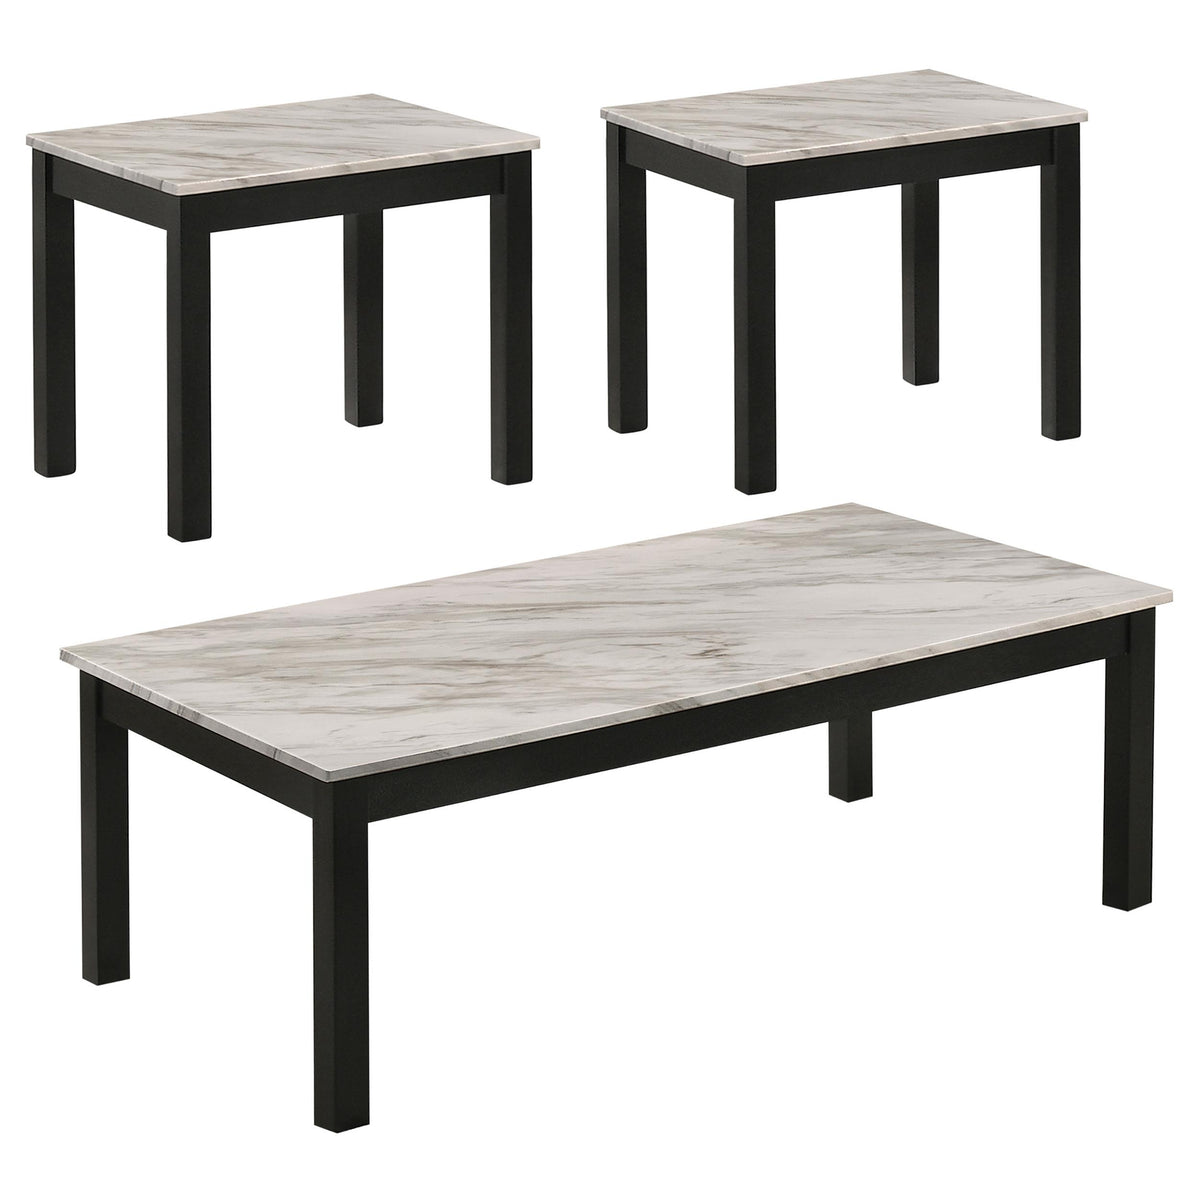 Bates Faux Marble 3-piece Occasional Table Set White and Black Bates Faux Marble 3-piece Occasional Table Set White and Black Half Price Furniture